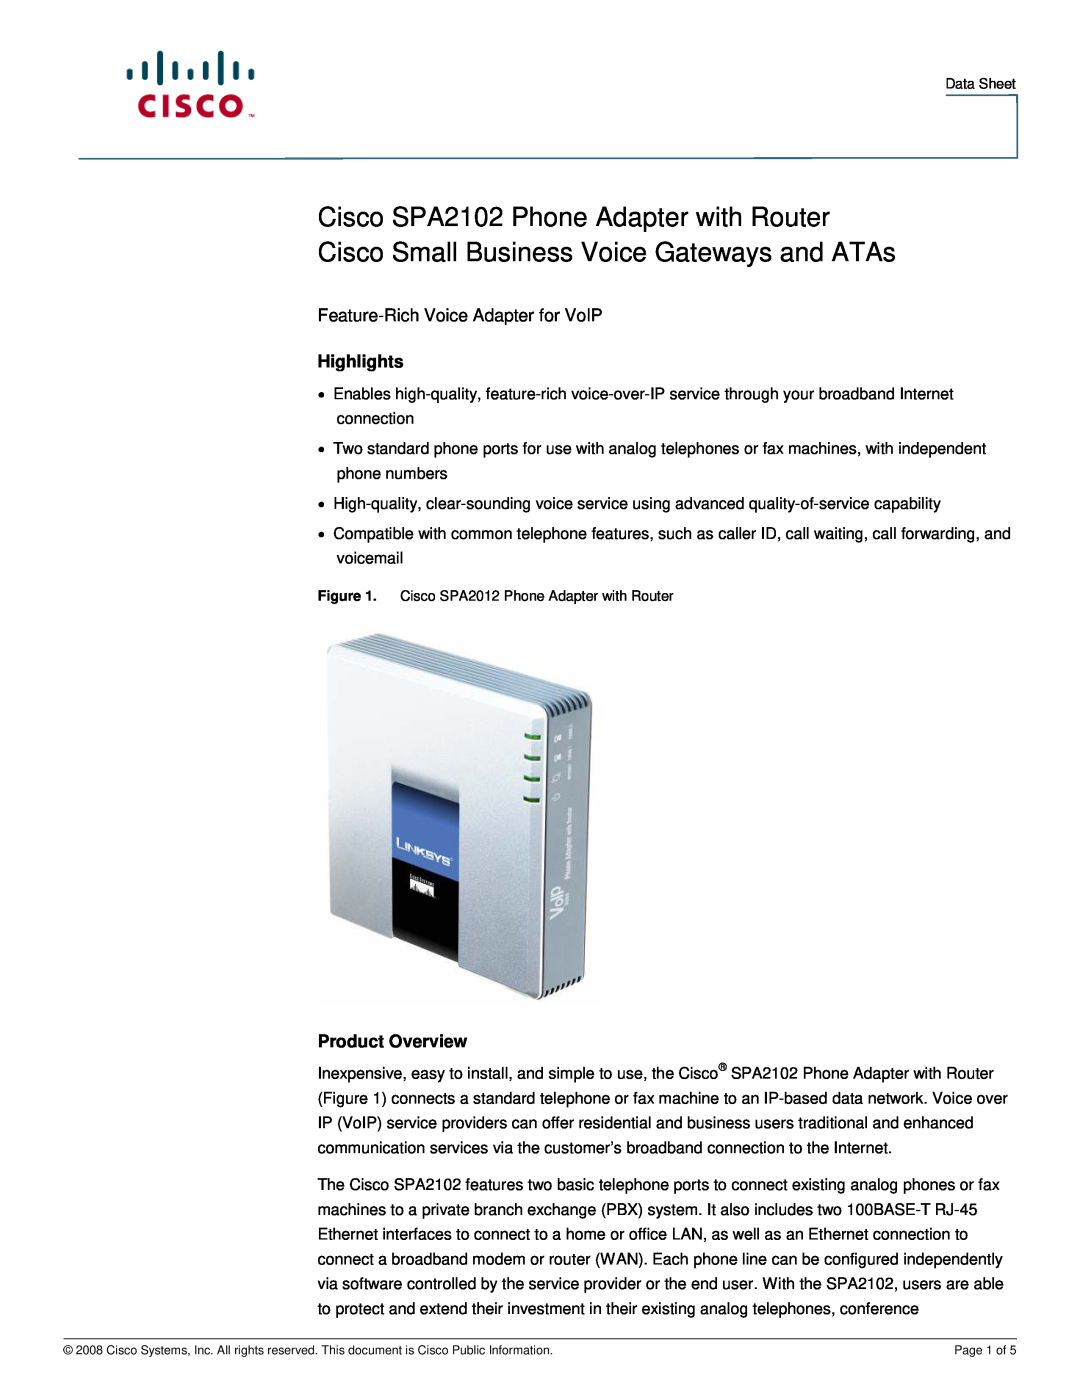 Cisco Systems manual Highlights, Product Overview, Cisco SPA2102 Phone Adapter with Router 